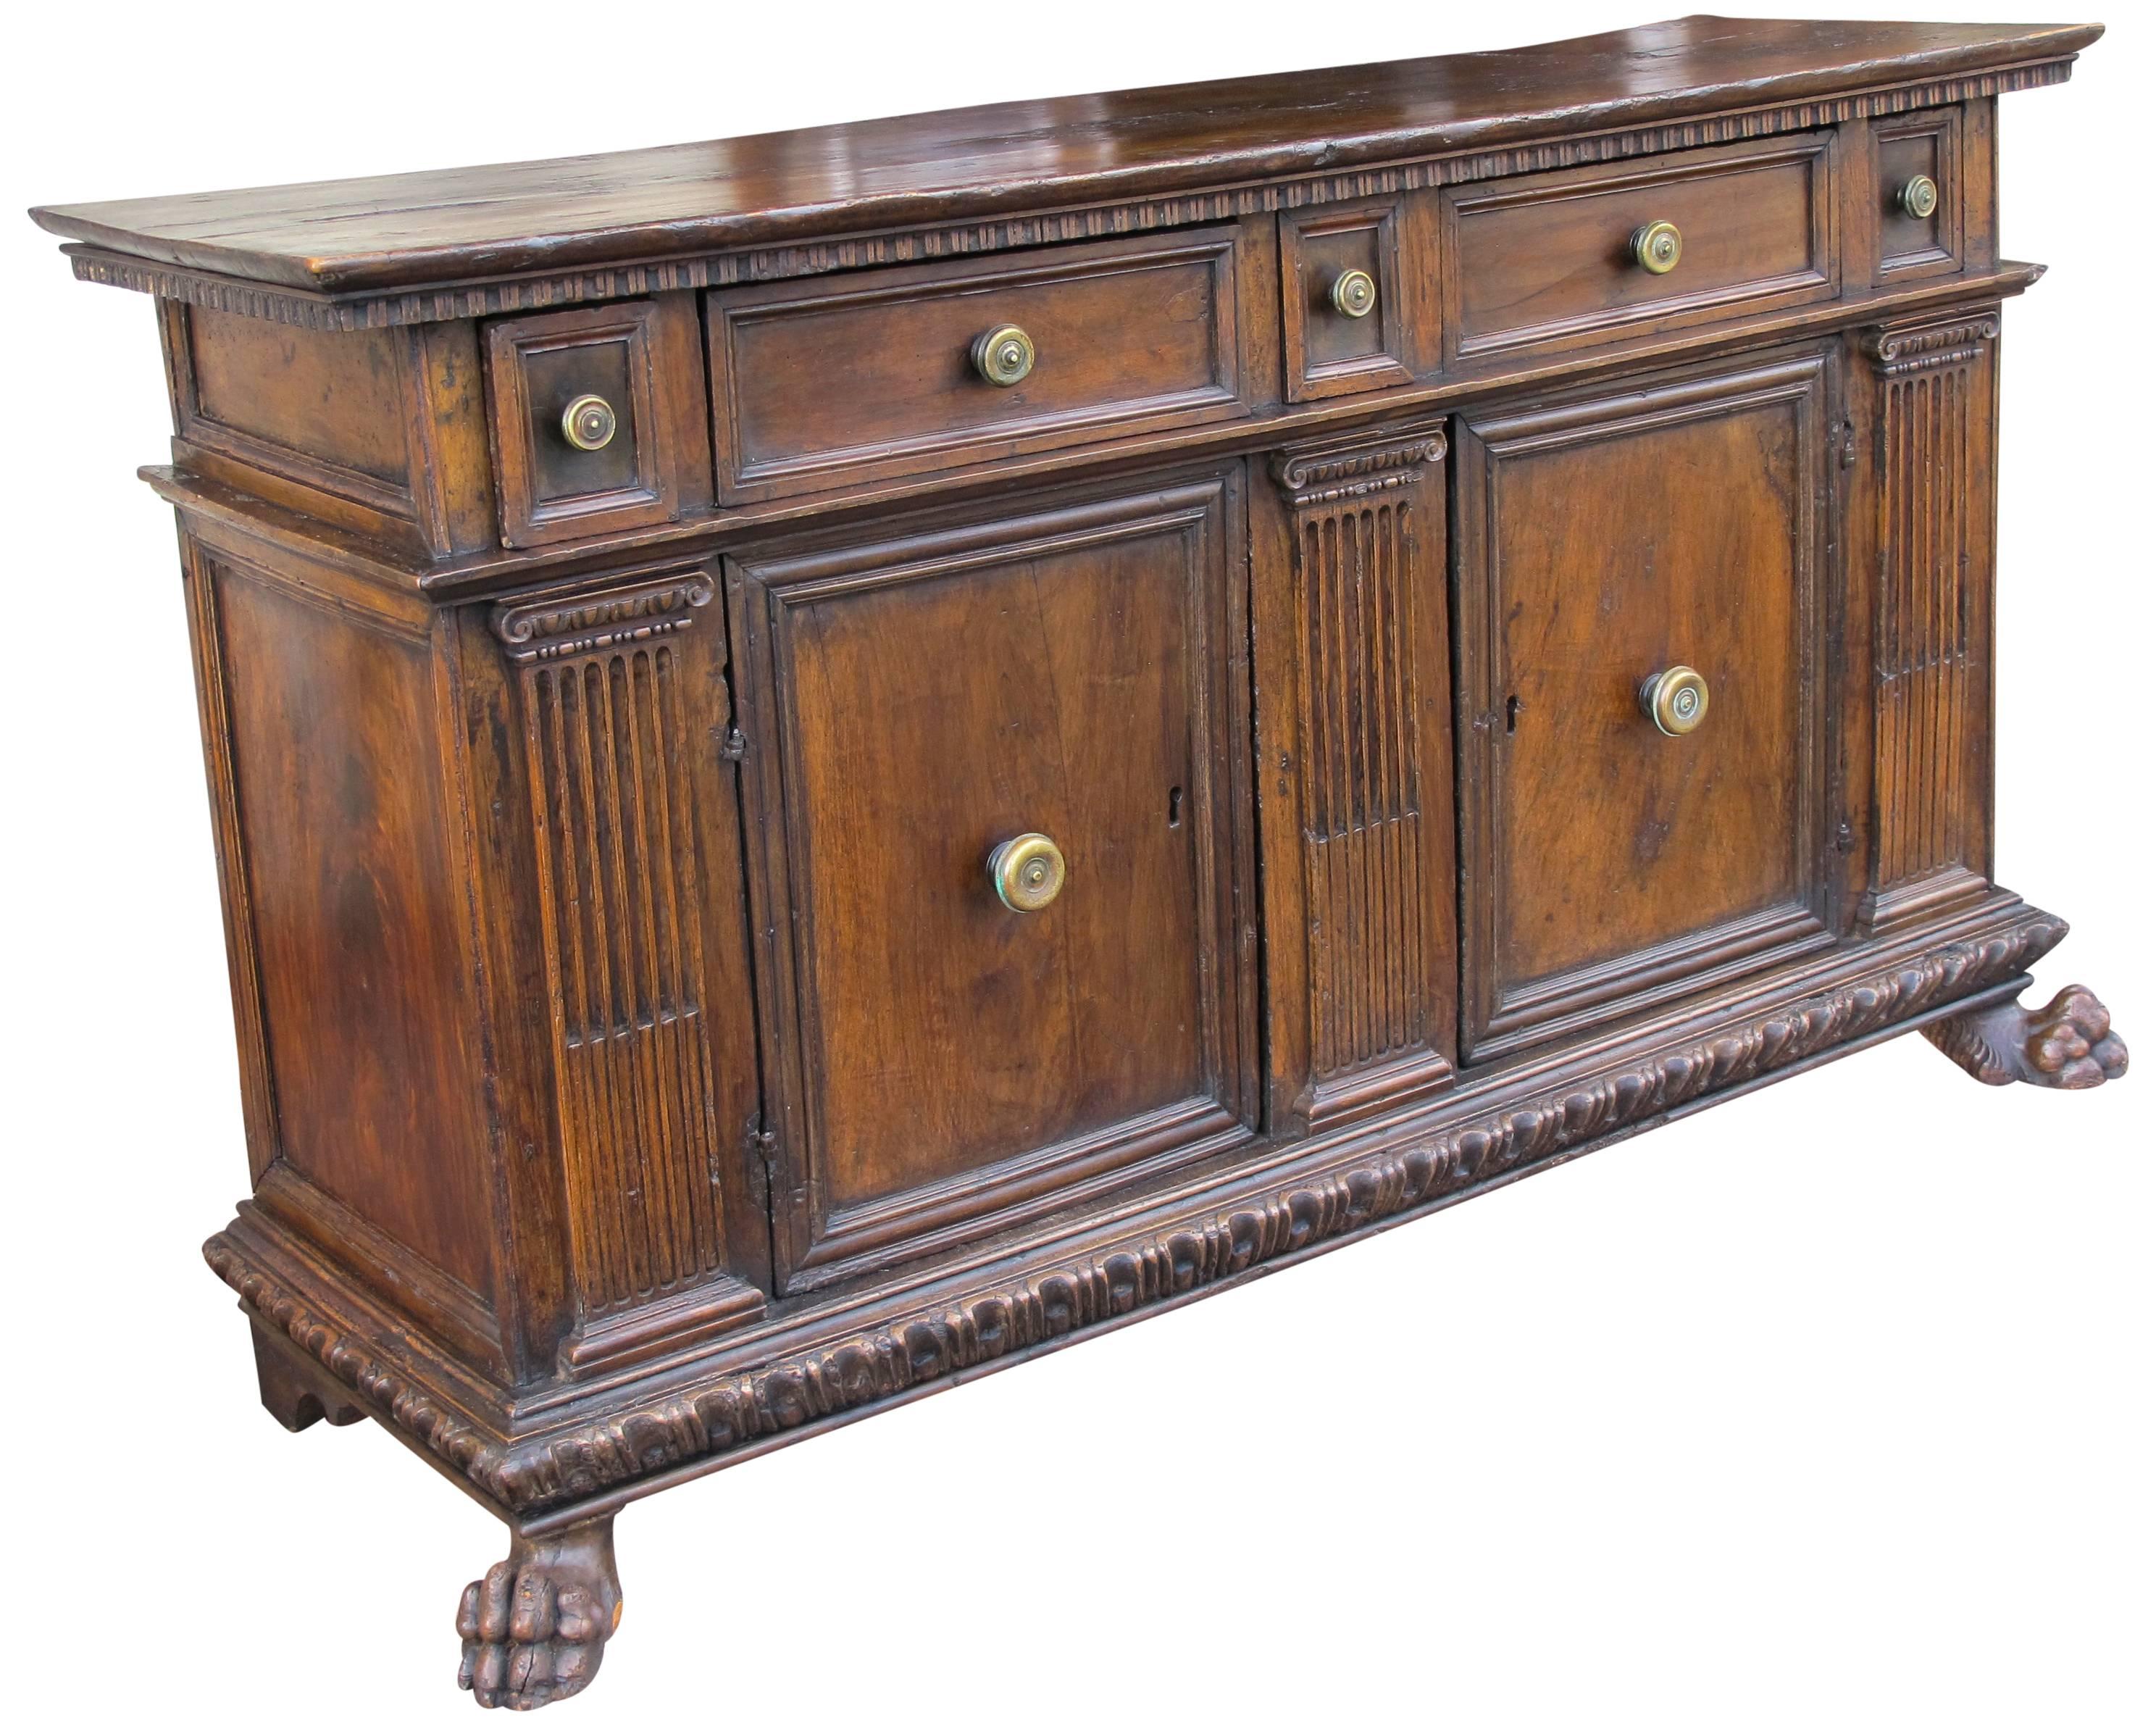 Extremely fine and rare 16th Century Italian Credenza composed of walnut with bronze pulls. 
Rectangular top with dentil molding on top of 5 top drawers separated by a molding with two large doors with bronze pulls. Flanked by three carved columns.